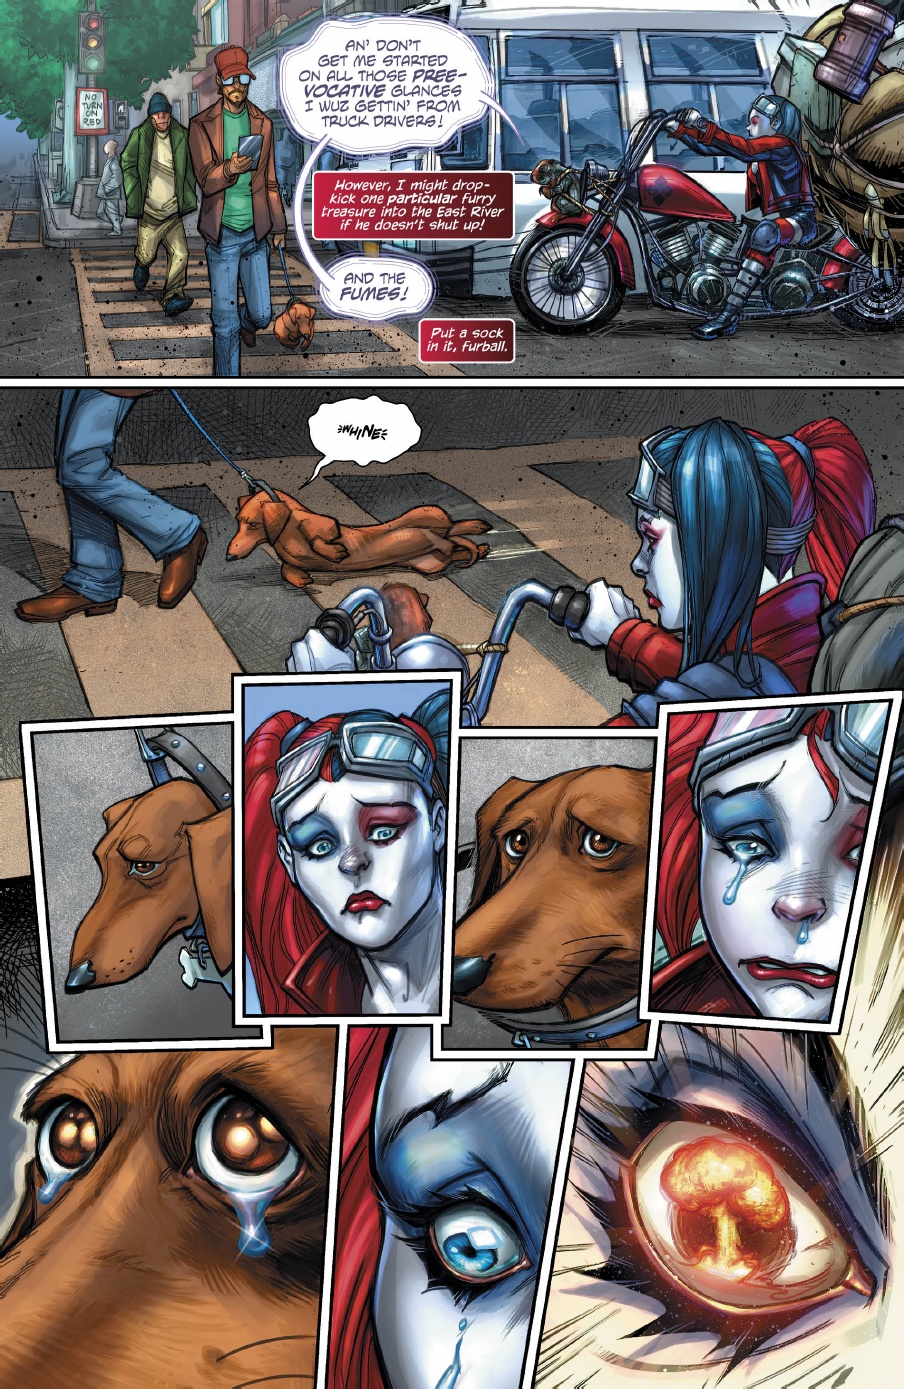 Image result for harley quinn issue 1 strip